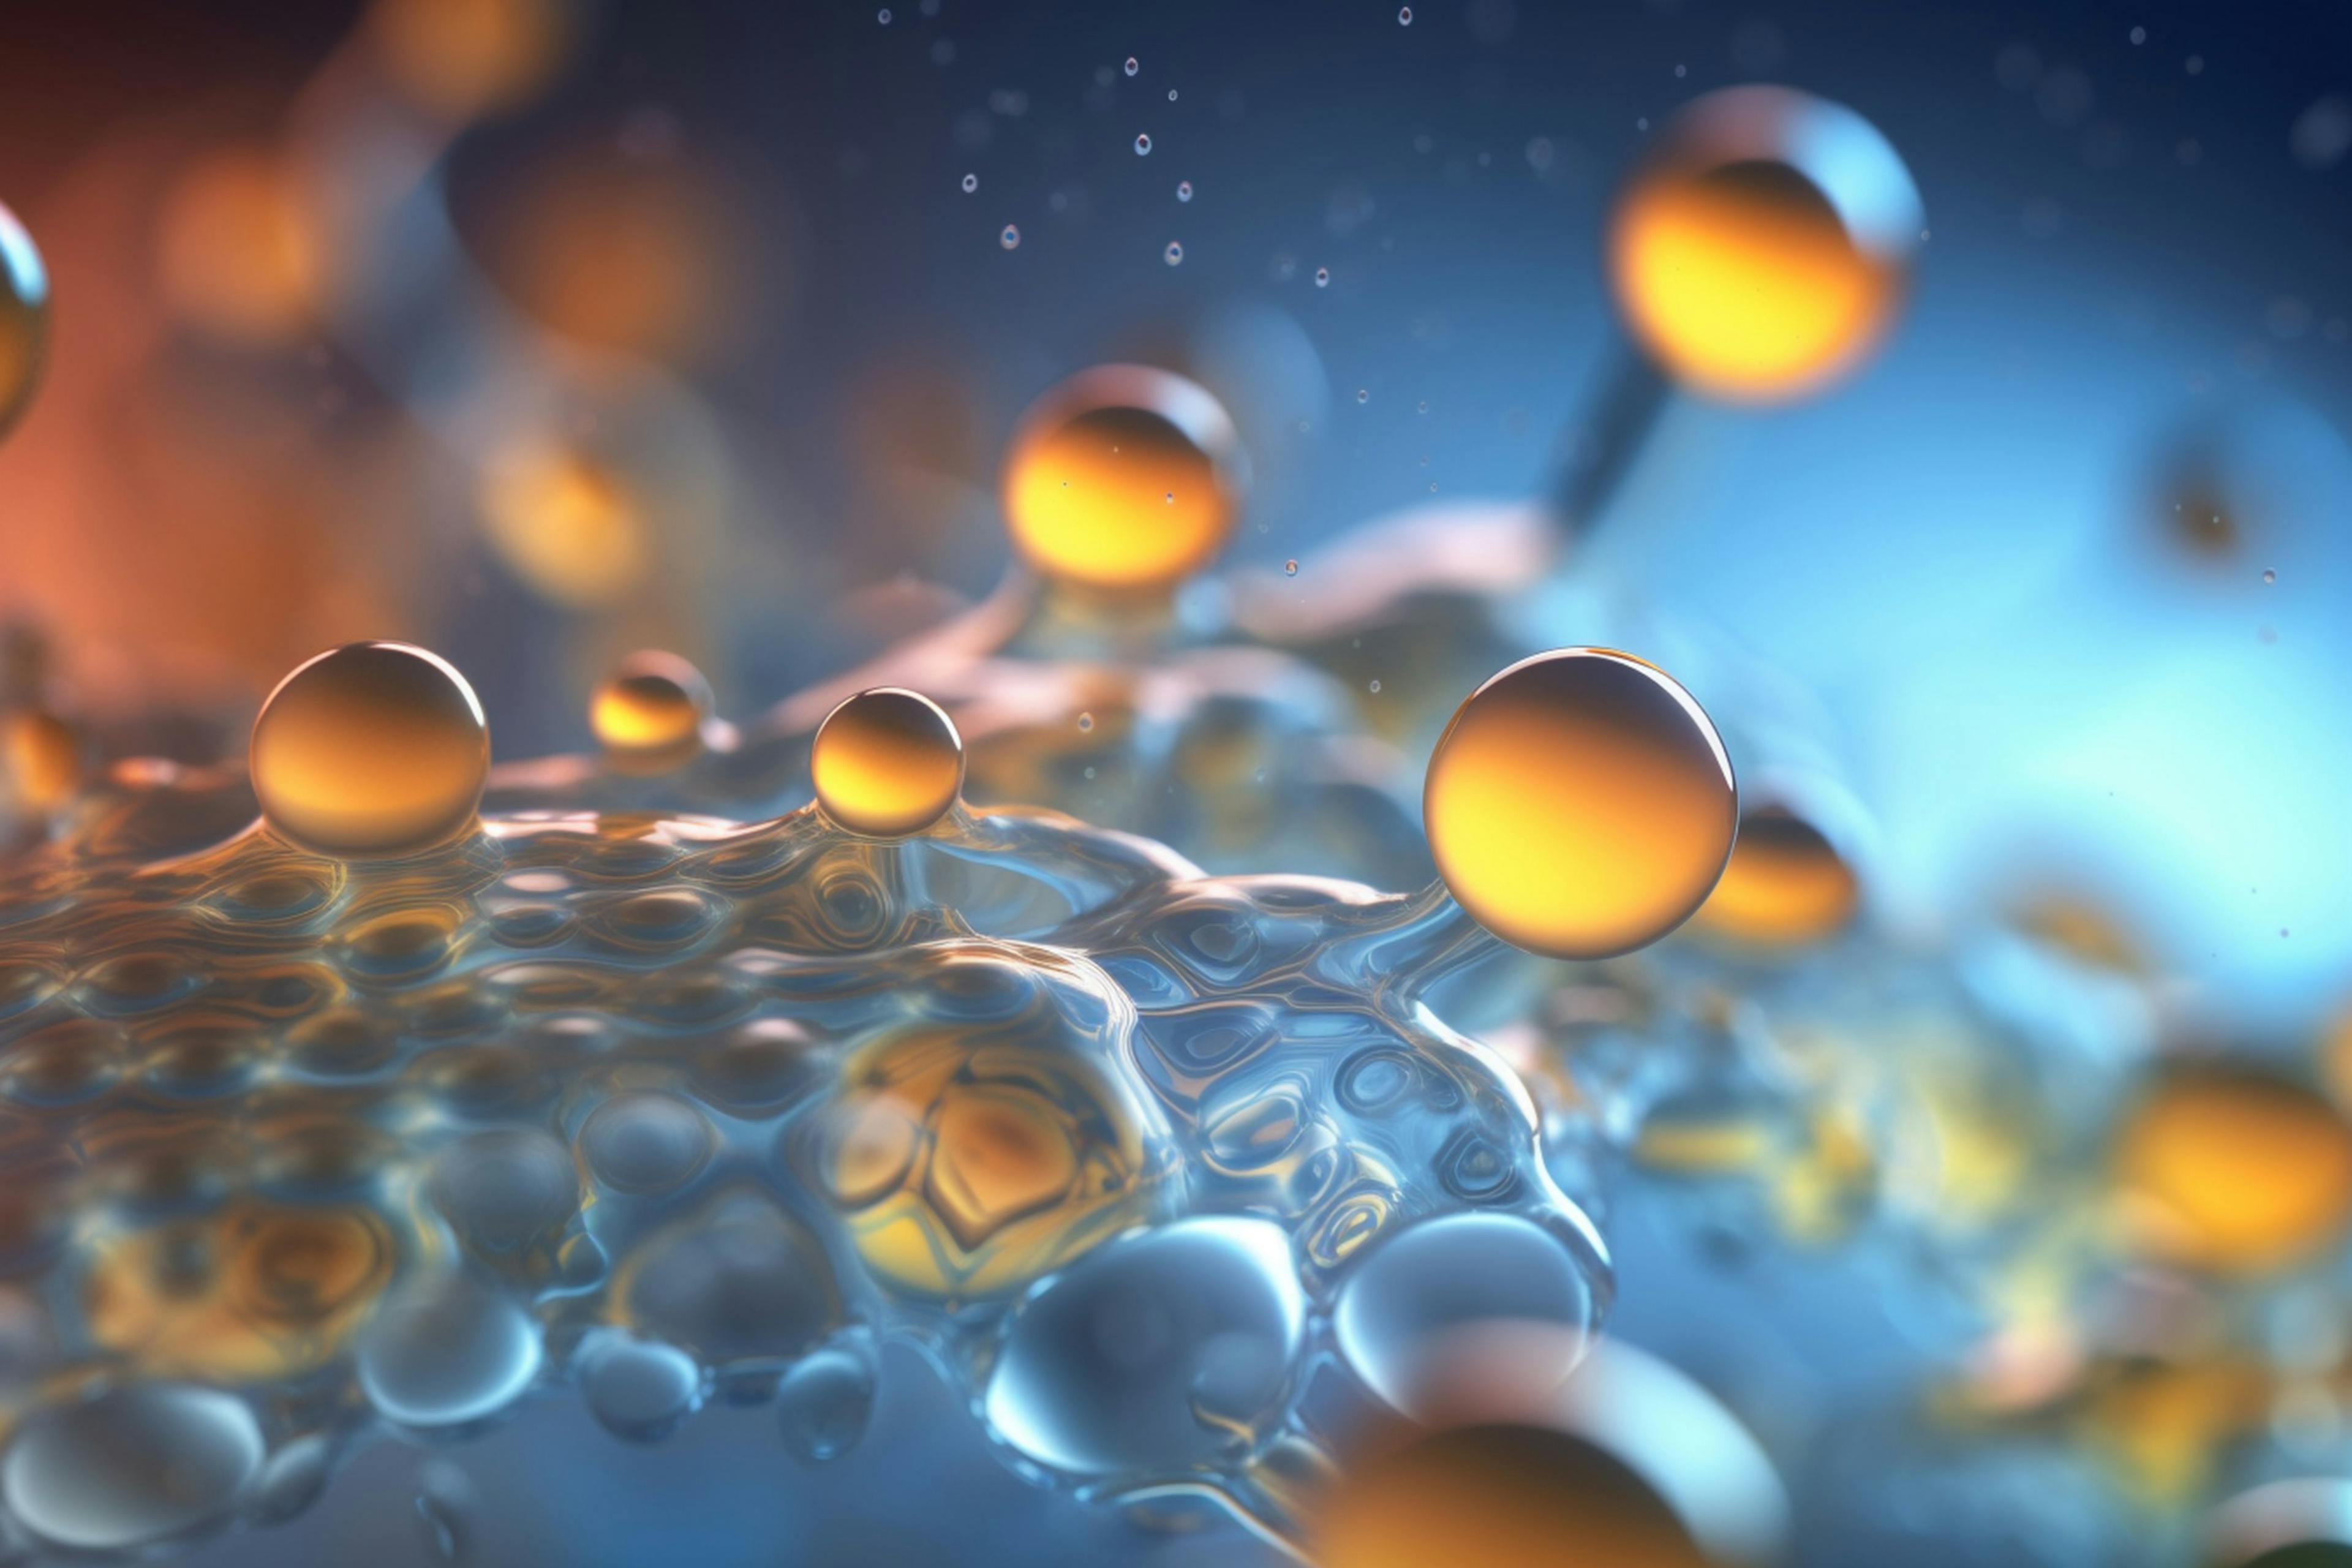 Colorful 3D Illustration of the Biochemical Process of Lipid Synthesis | Image Credit: © artefacti - stock.adobe.com